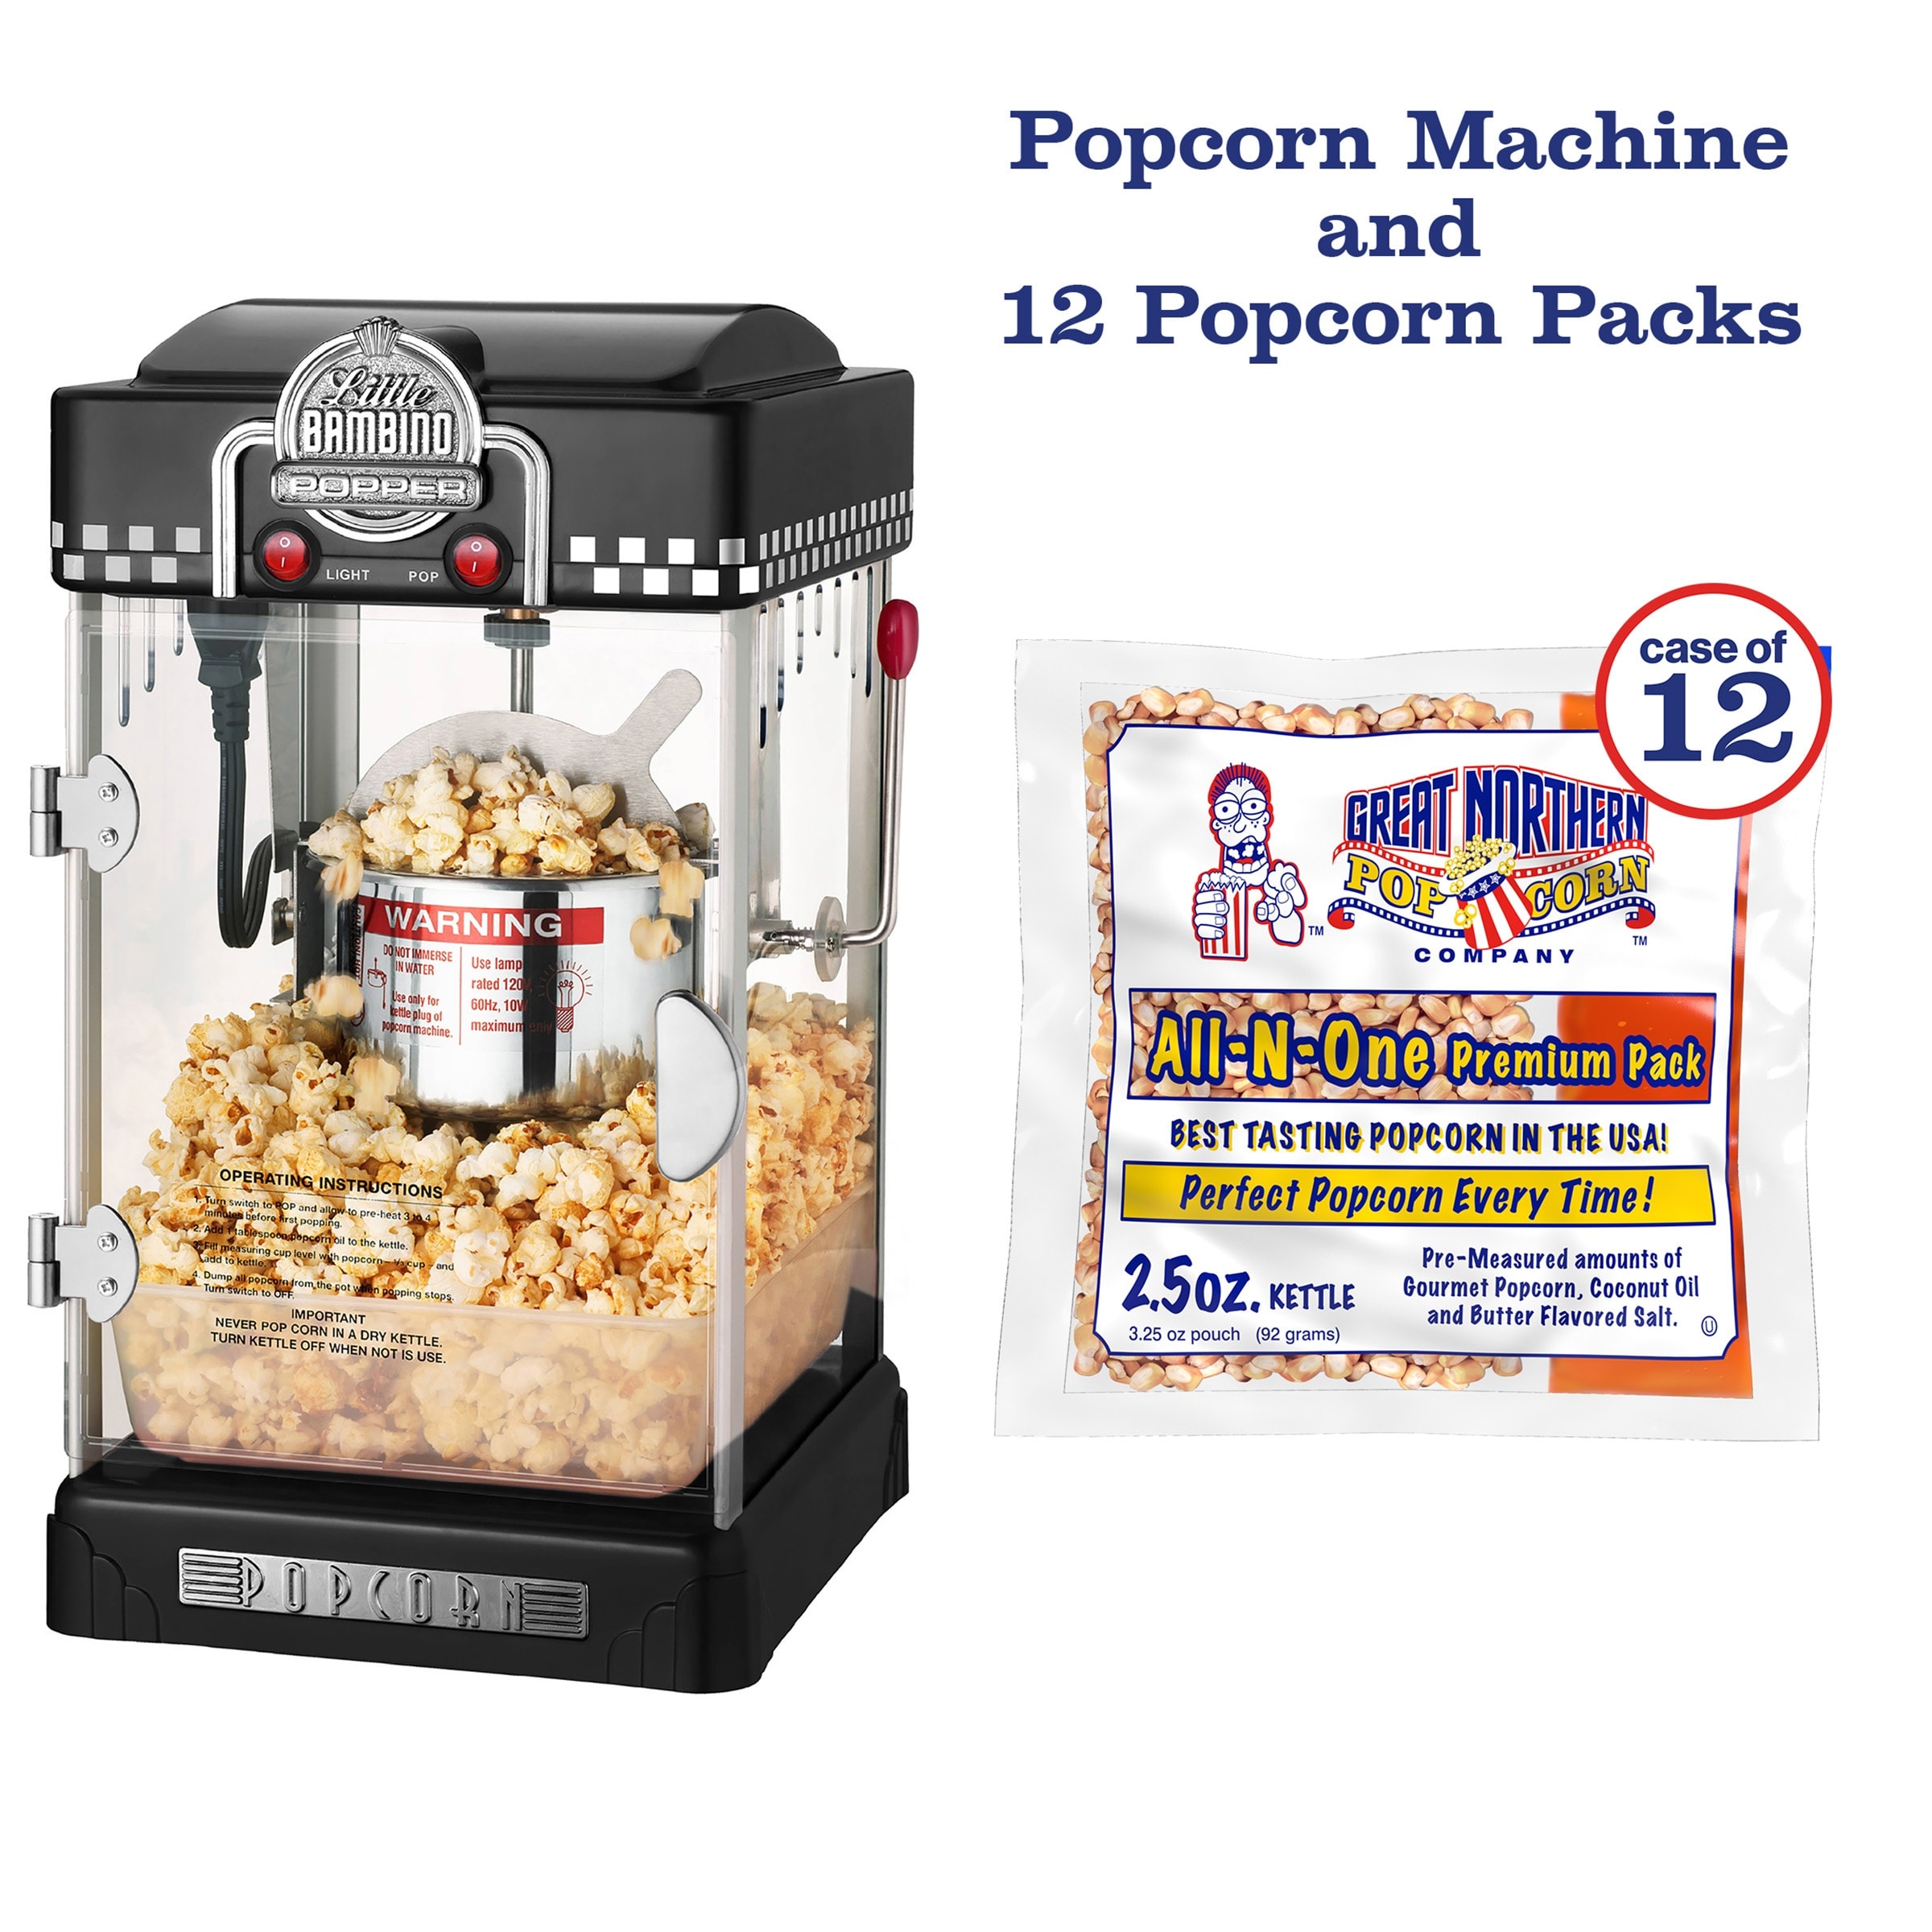 https://ak1.ostkcdn.com/images/products/is/images/direct/8c9c00866e13a9b06248cbdac9add9ba3b0585ed/Little-Bambino-Popcorn-Machine-with-12-Pack-of-All-In-One-Popcorn-Kernel-Packets-by-Great-Northern-Popcorn-%28Black%29.jpg